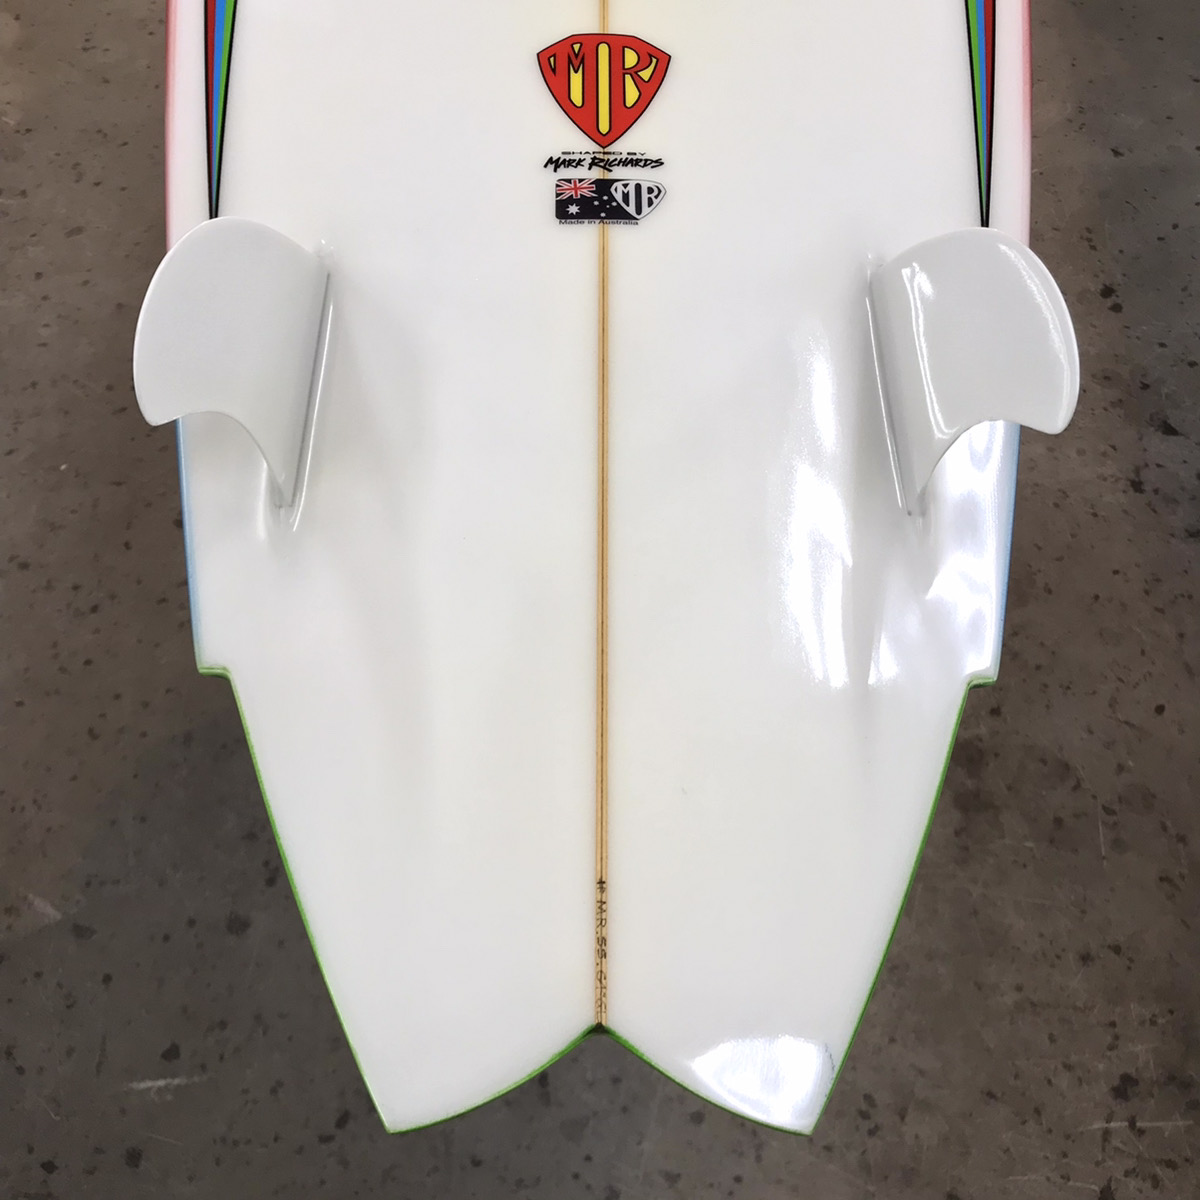 MARK RICHARDS / FREE RIDE REPLICA 6`4 Shaped by MR